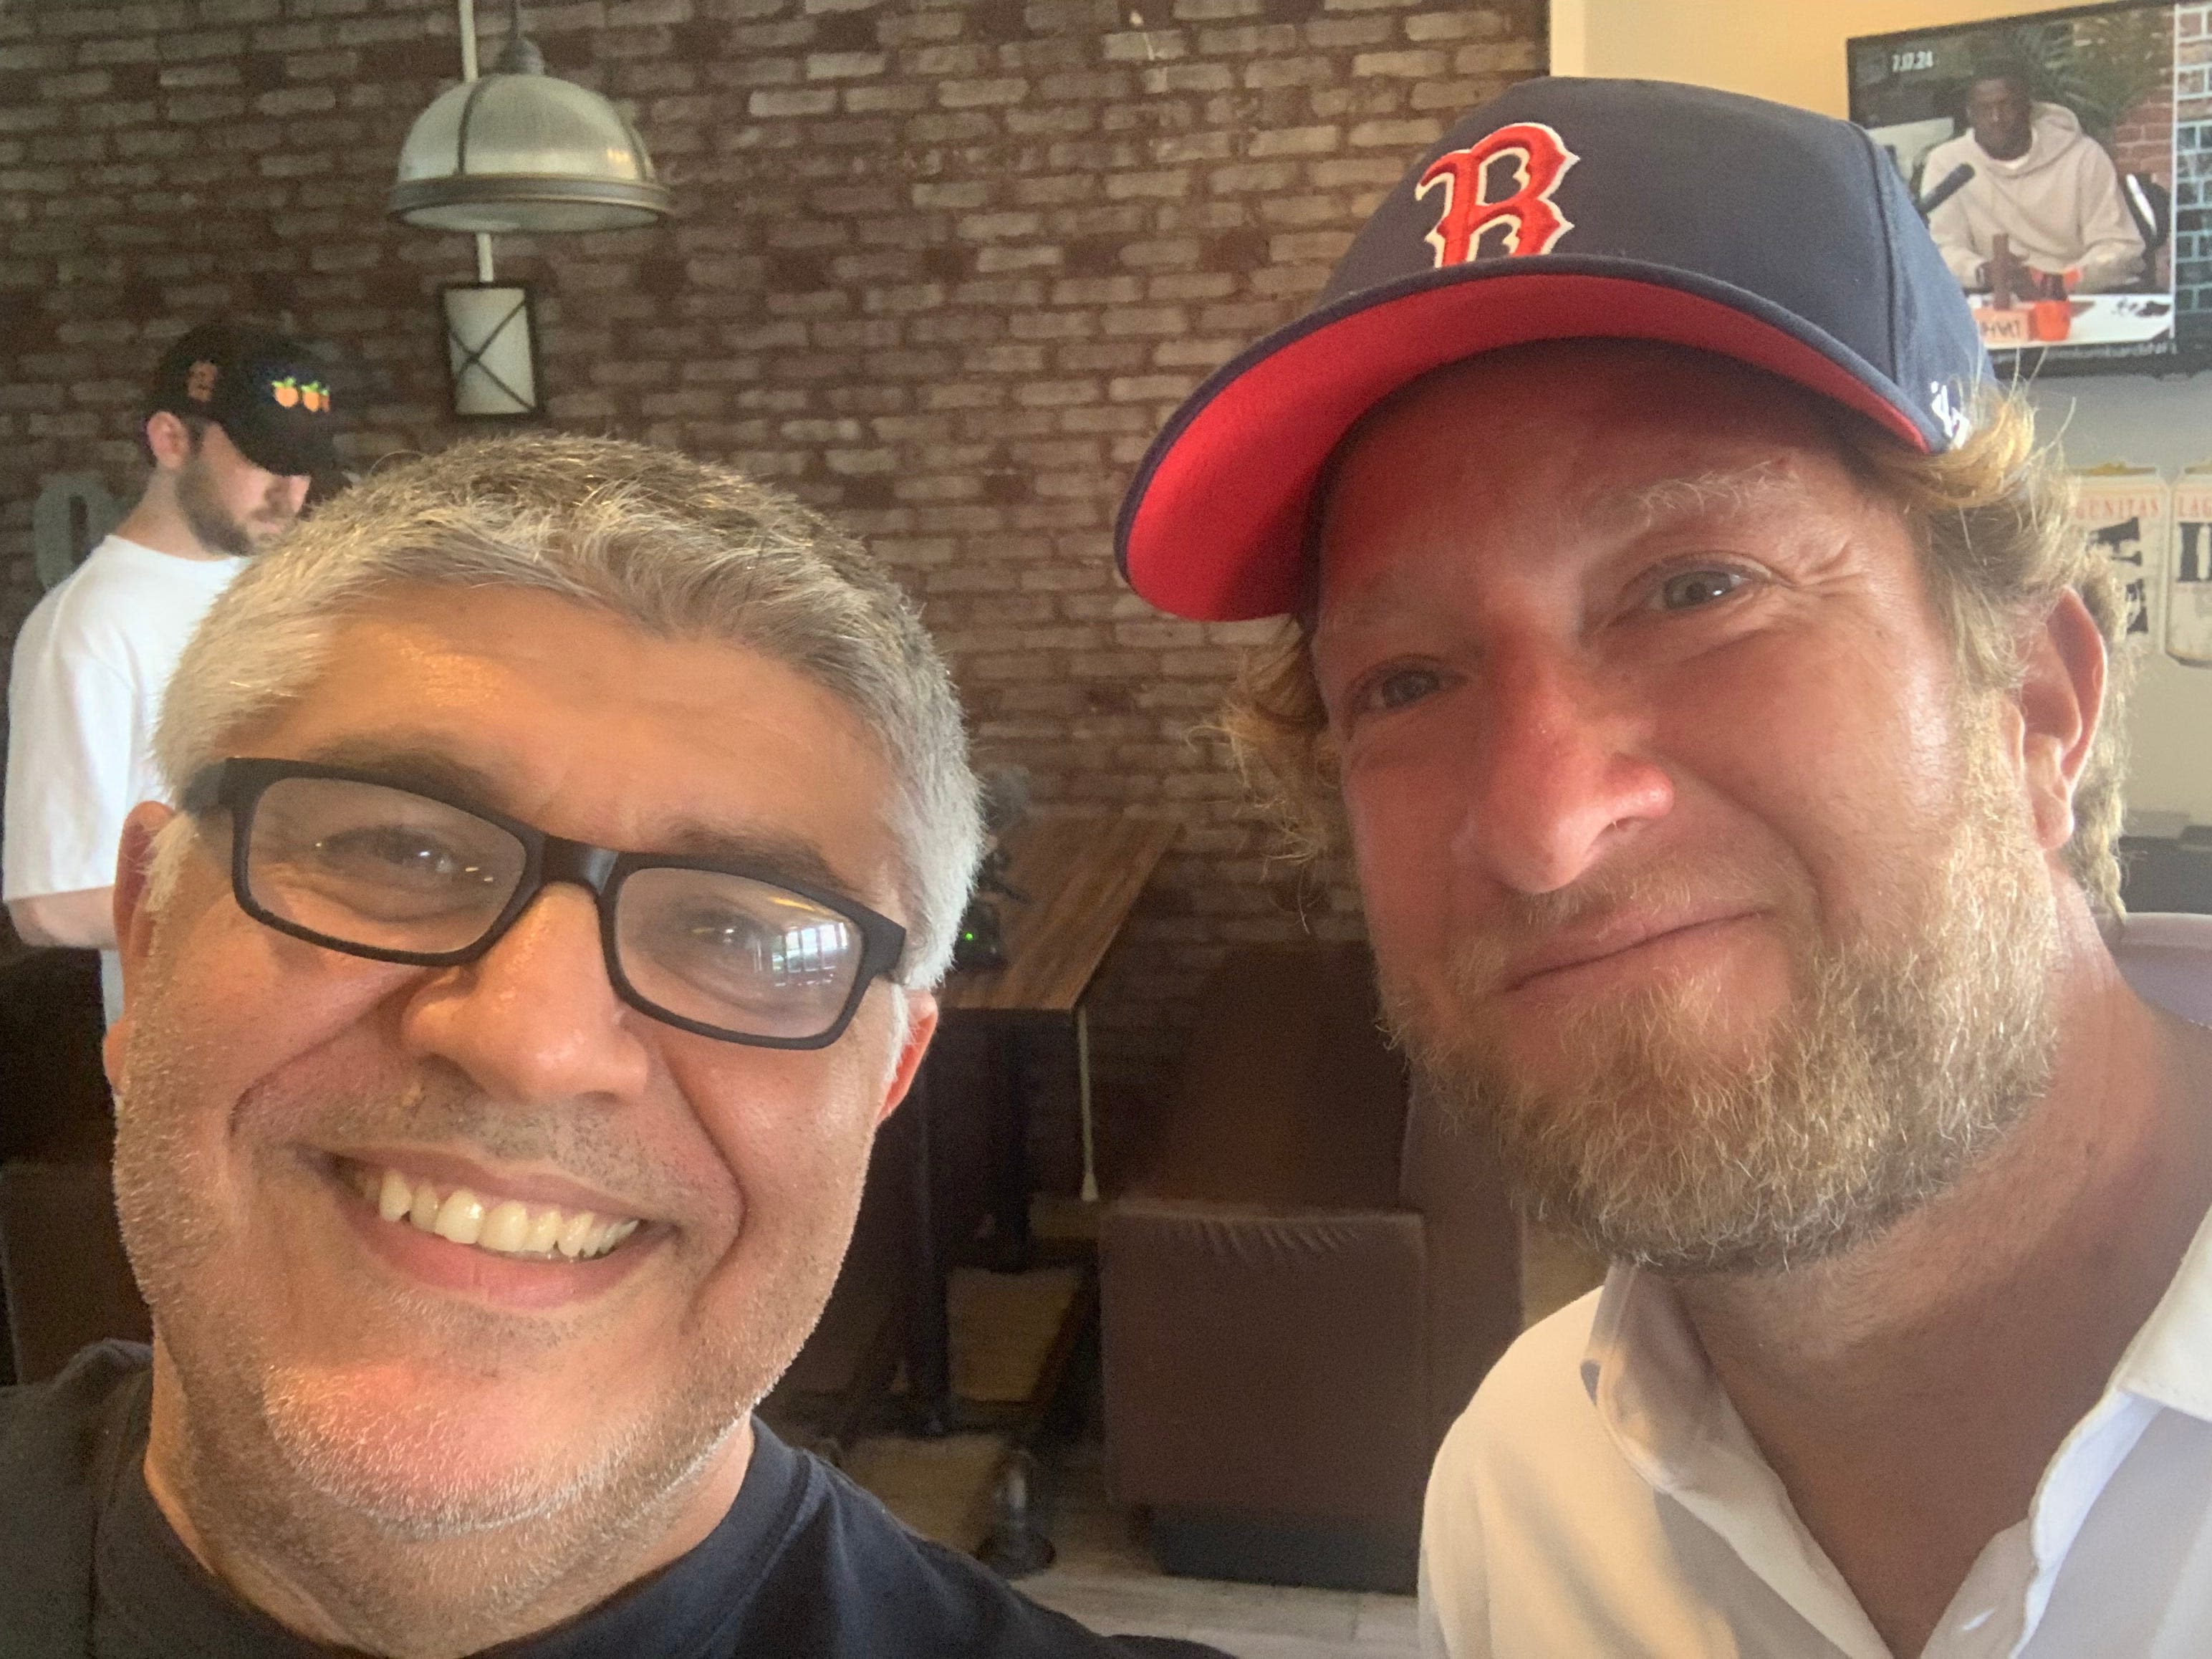 Barstool Sports founder Dave Portnoy back on the South Shore for a 'One Bite' pizza review